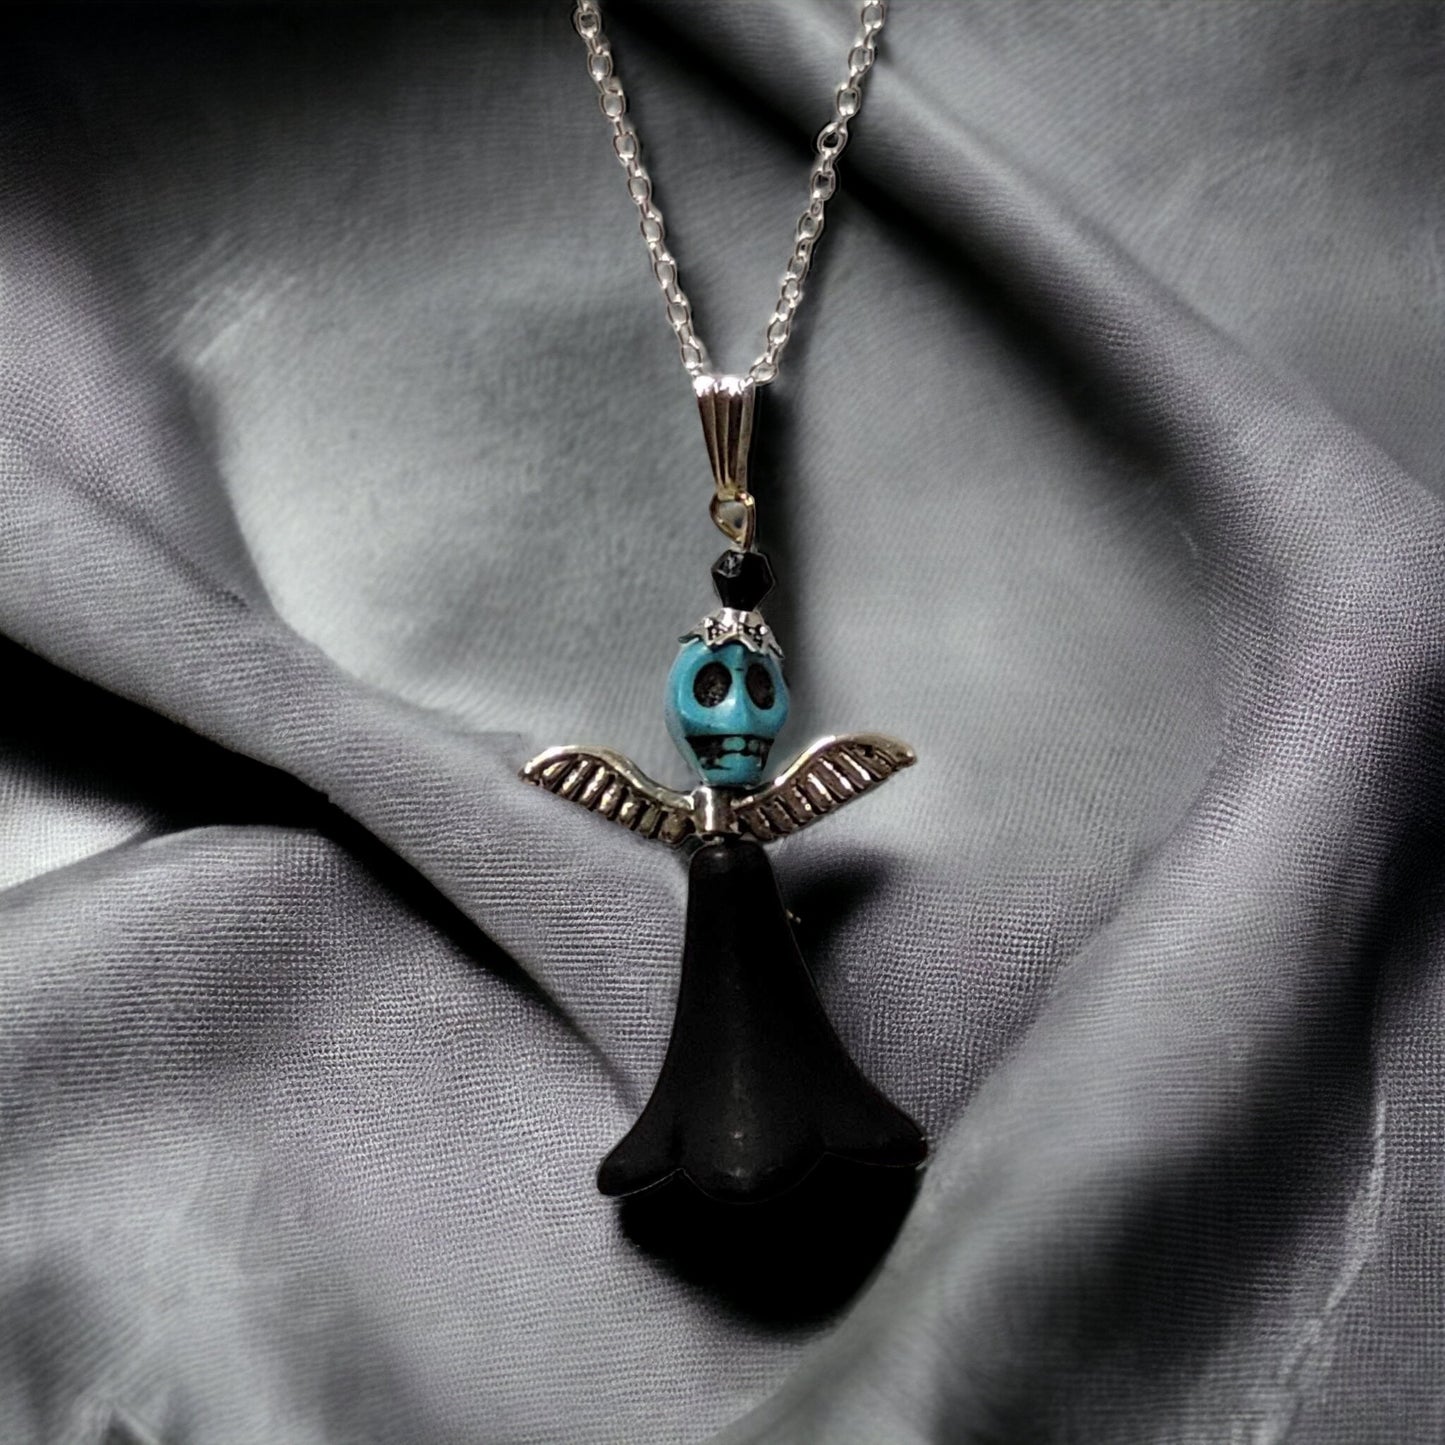 Blue Winged Skull Necklace